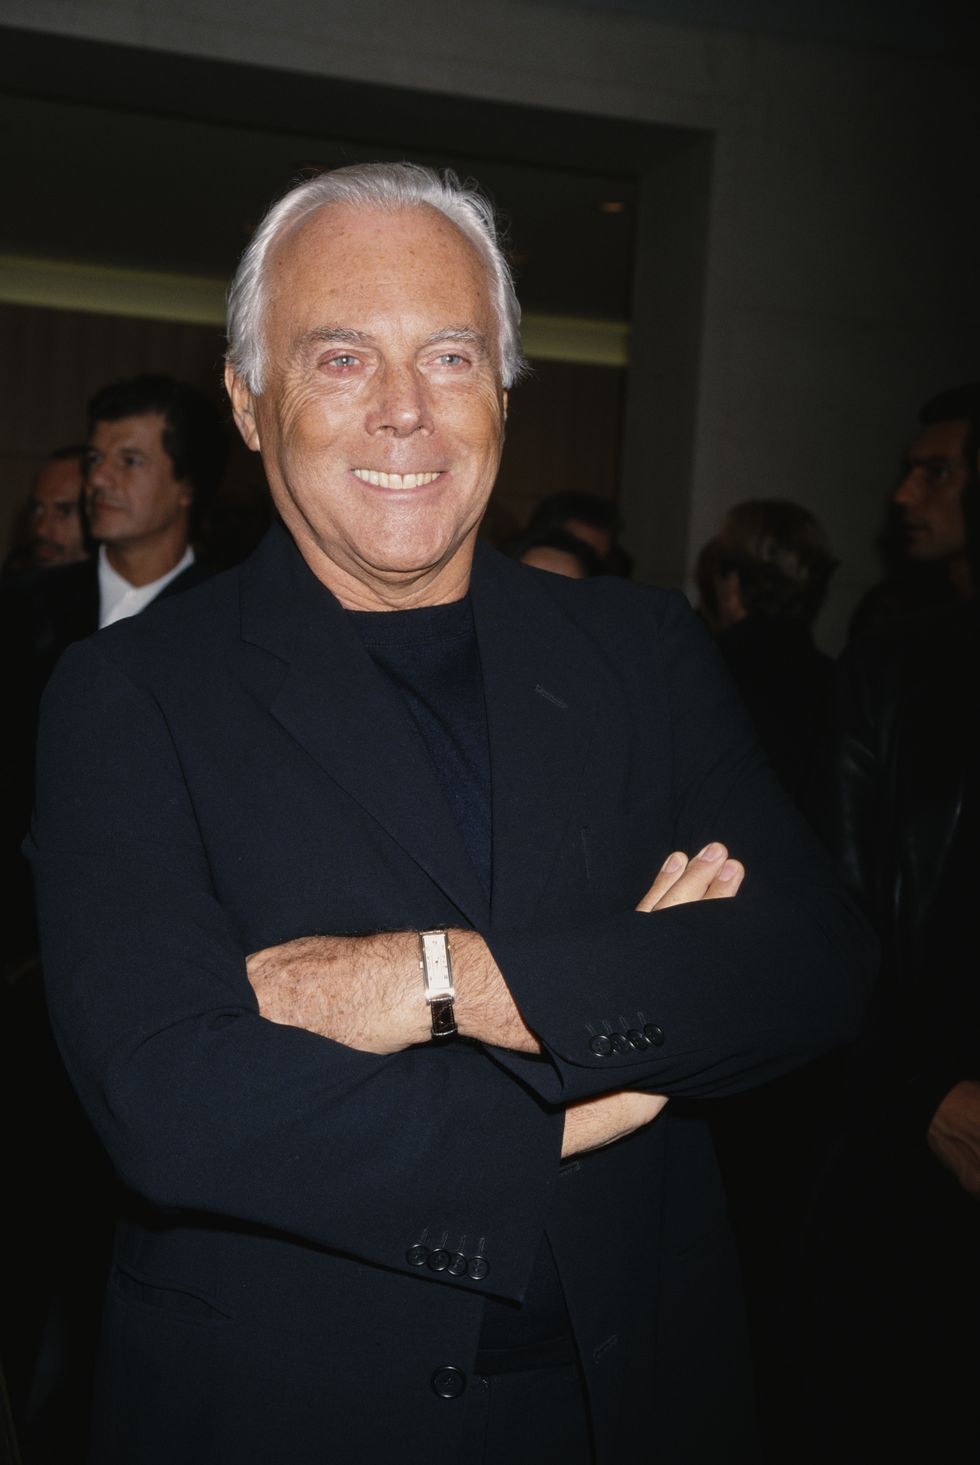 italian fashion designer giorgio armani at a party hosted by armani for sophia lorens recipes and memories book, 1999 photo by rose hartmangetty images